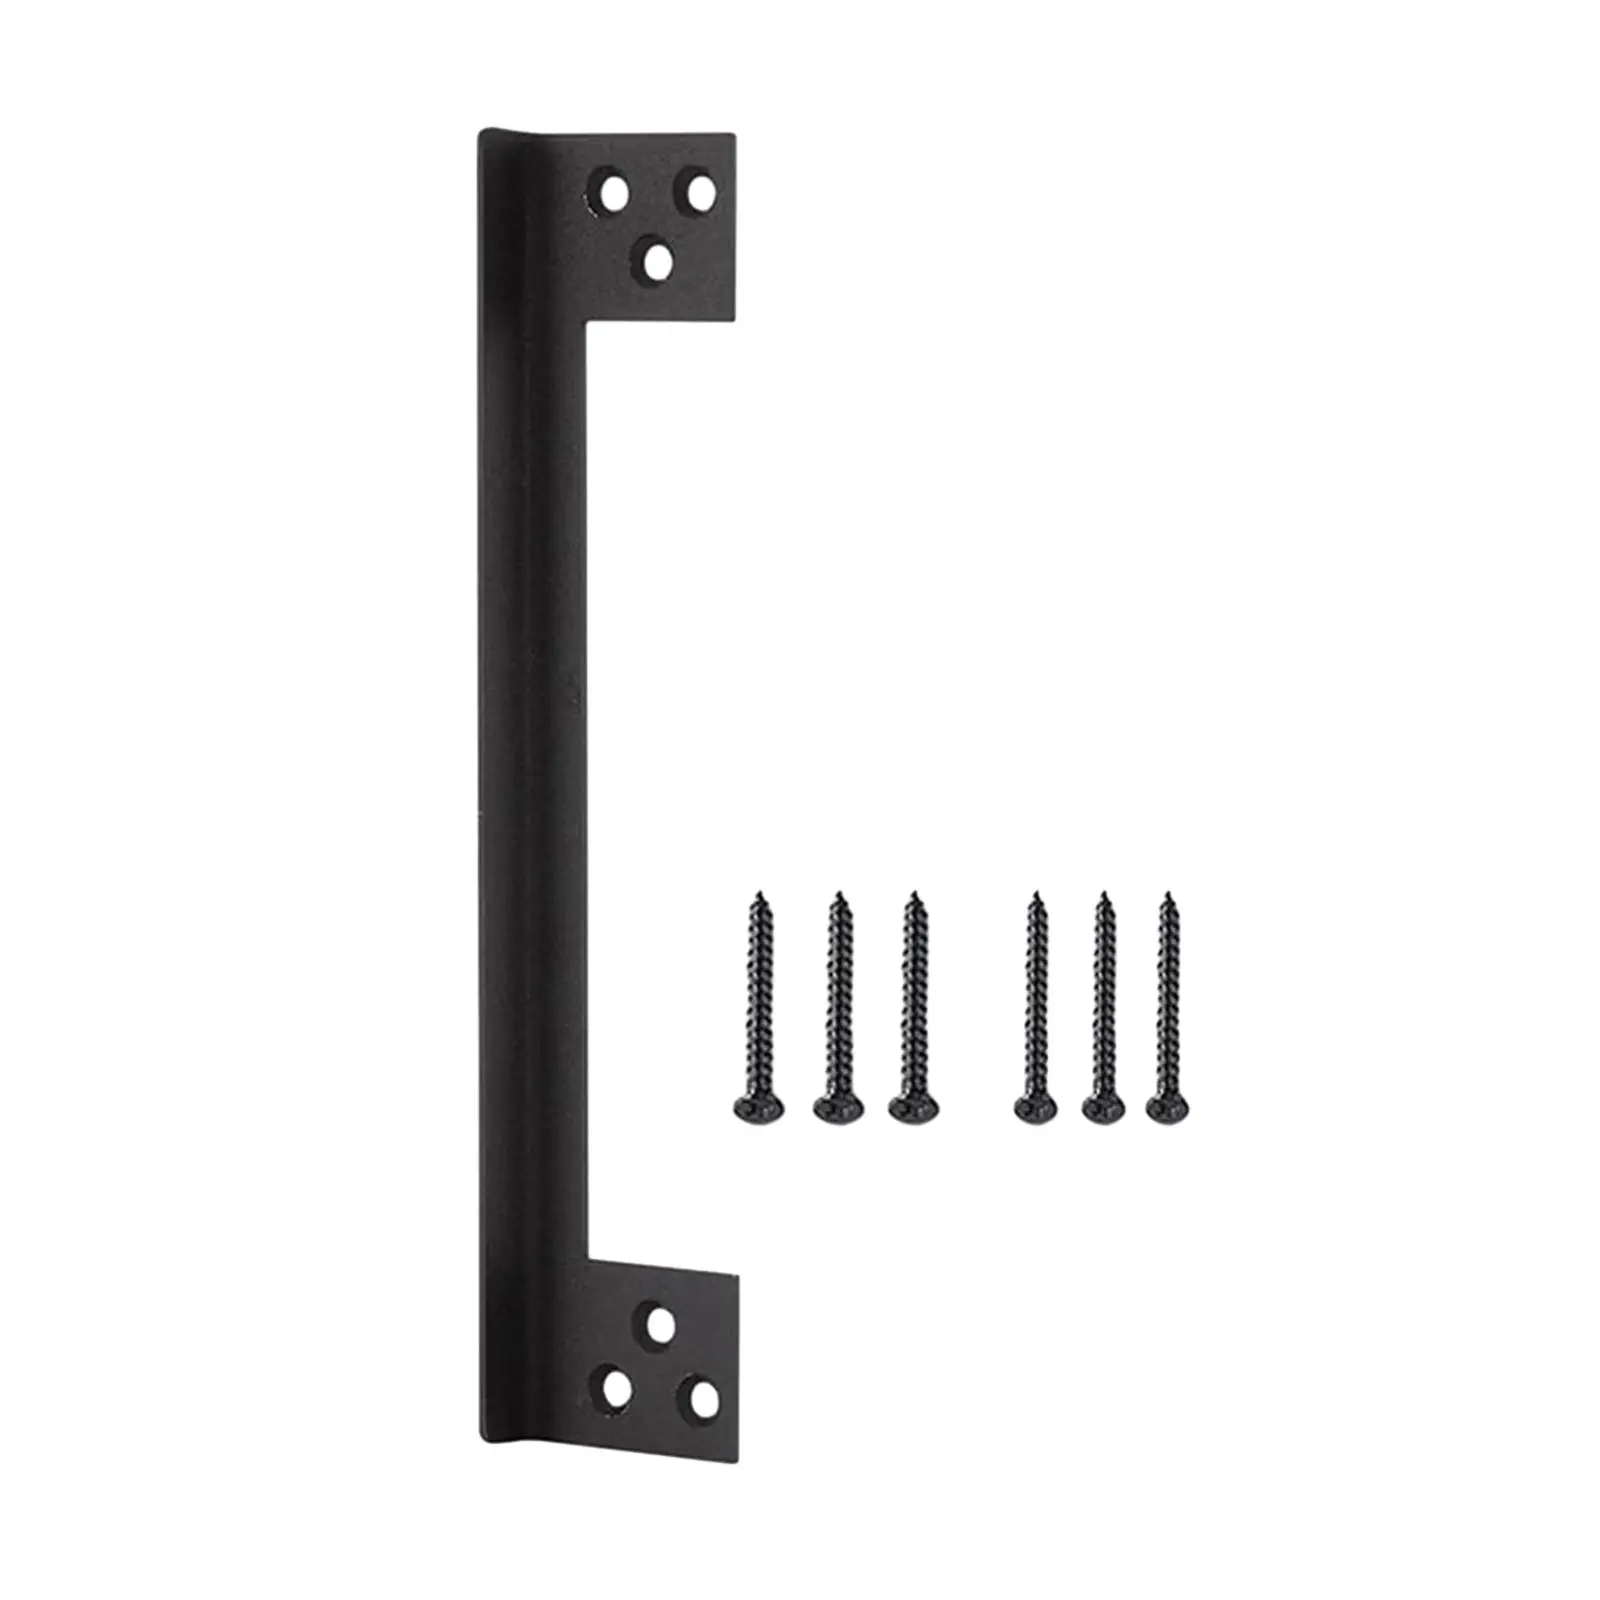 Door Latch Guard Plate, Outswing Door Security Protector Reversible Protect against Forced Entry, Latch Protect Cover